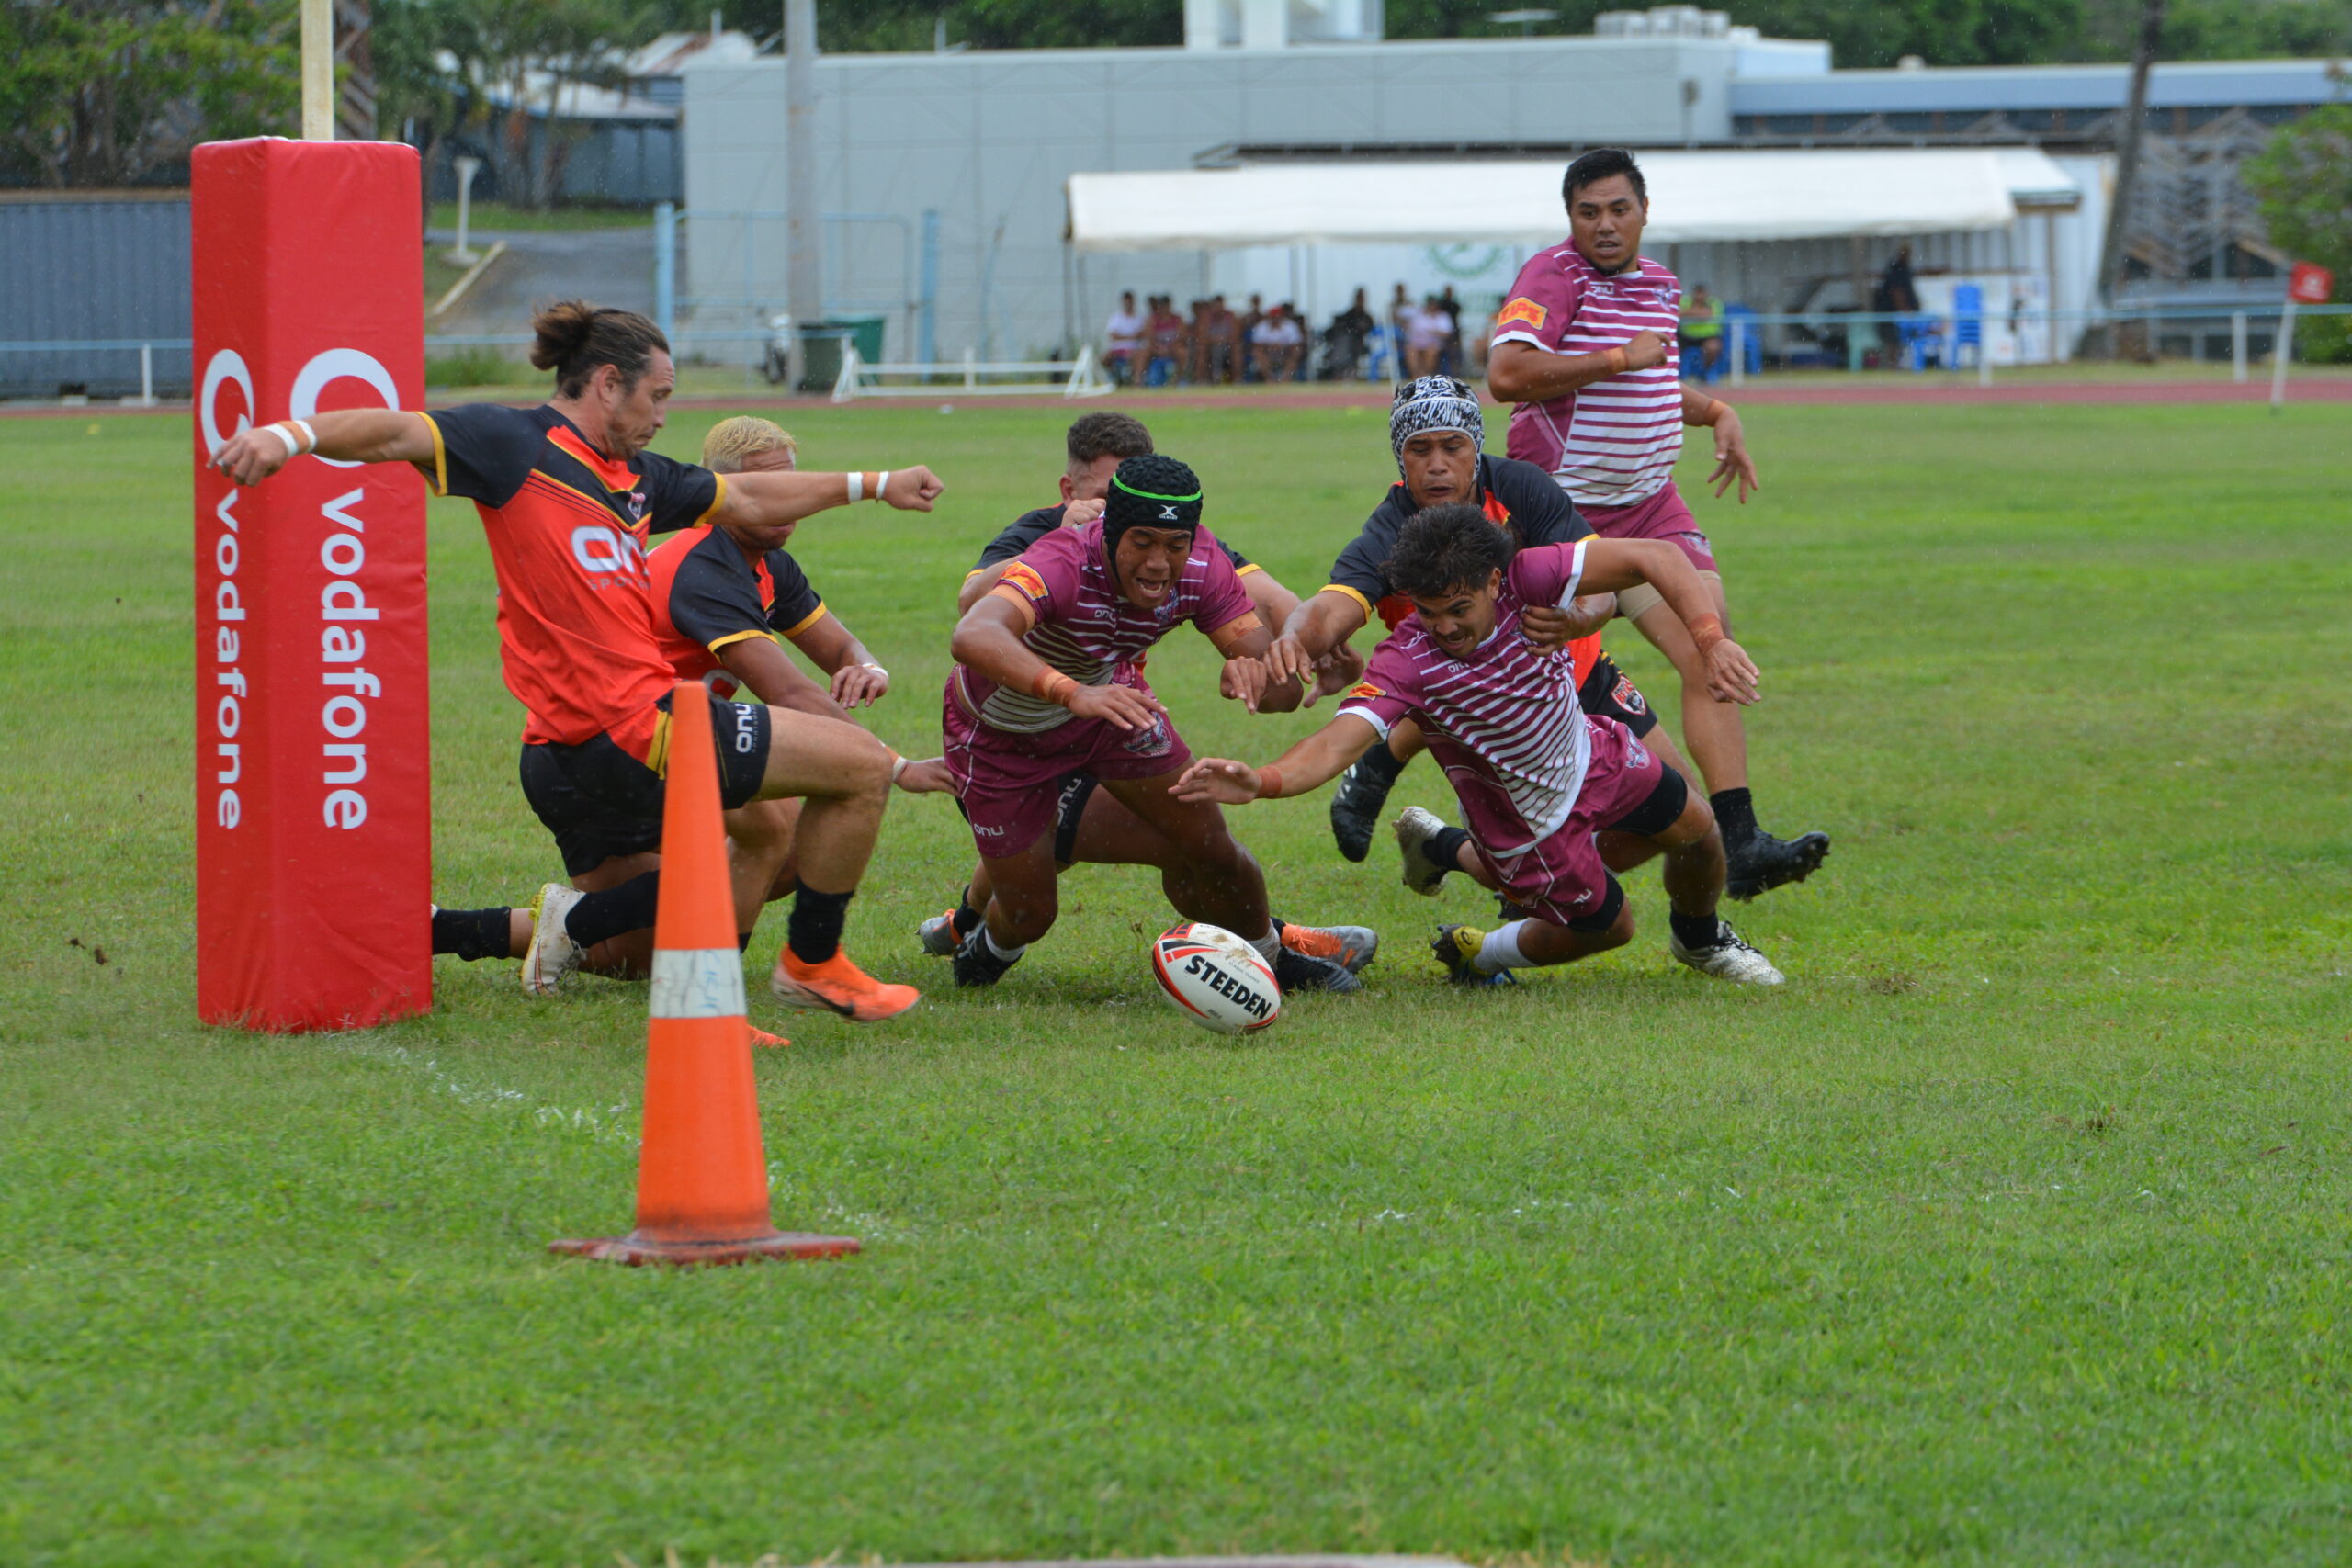 League Nines in Paradise off to exciting start